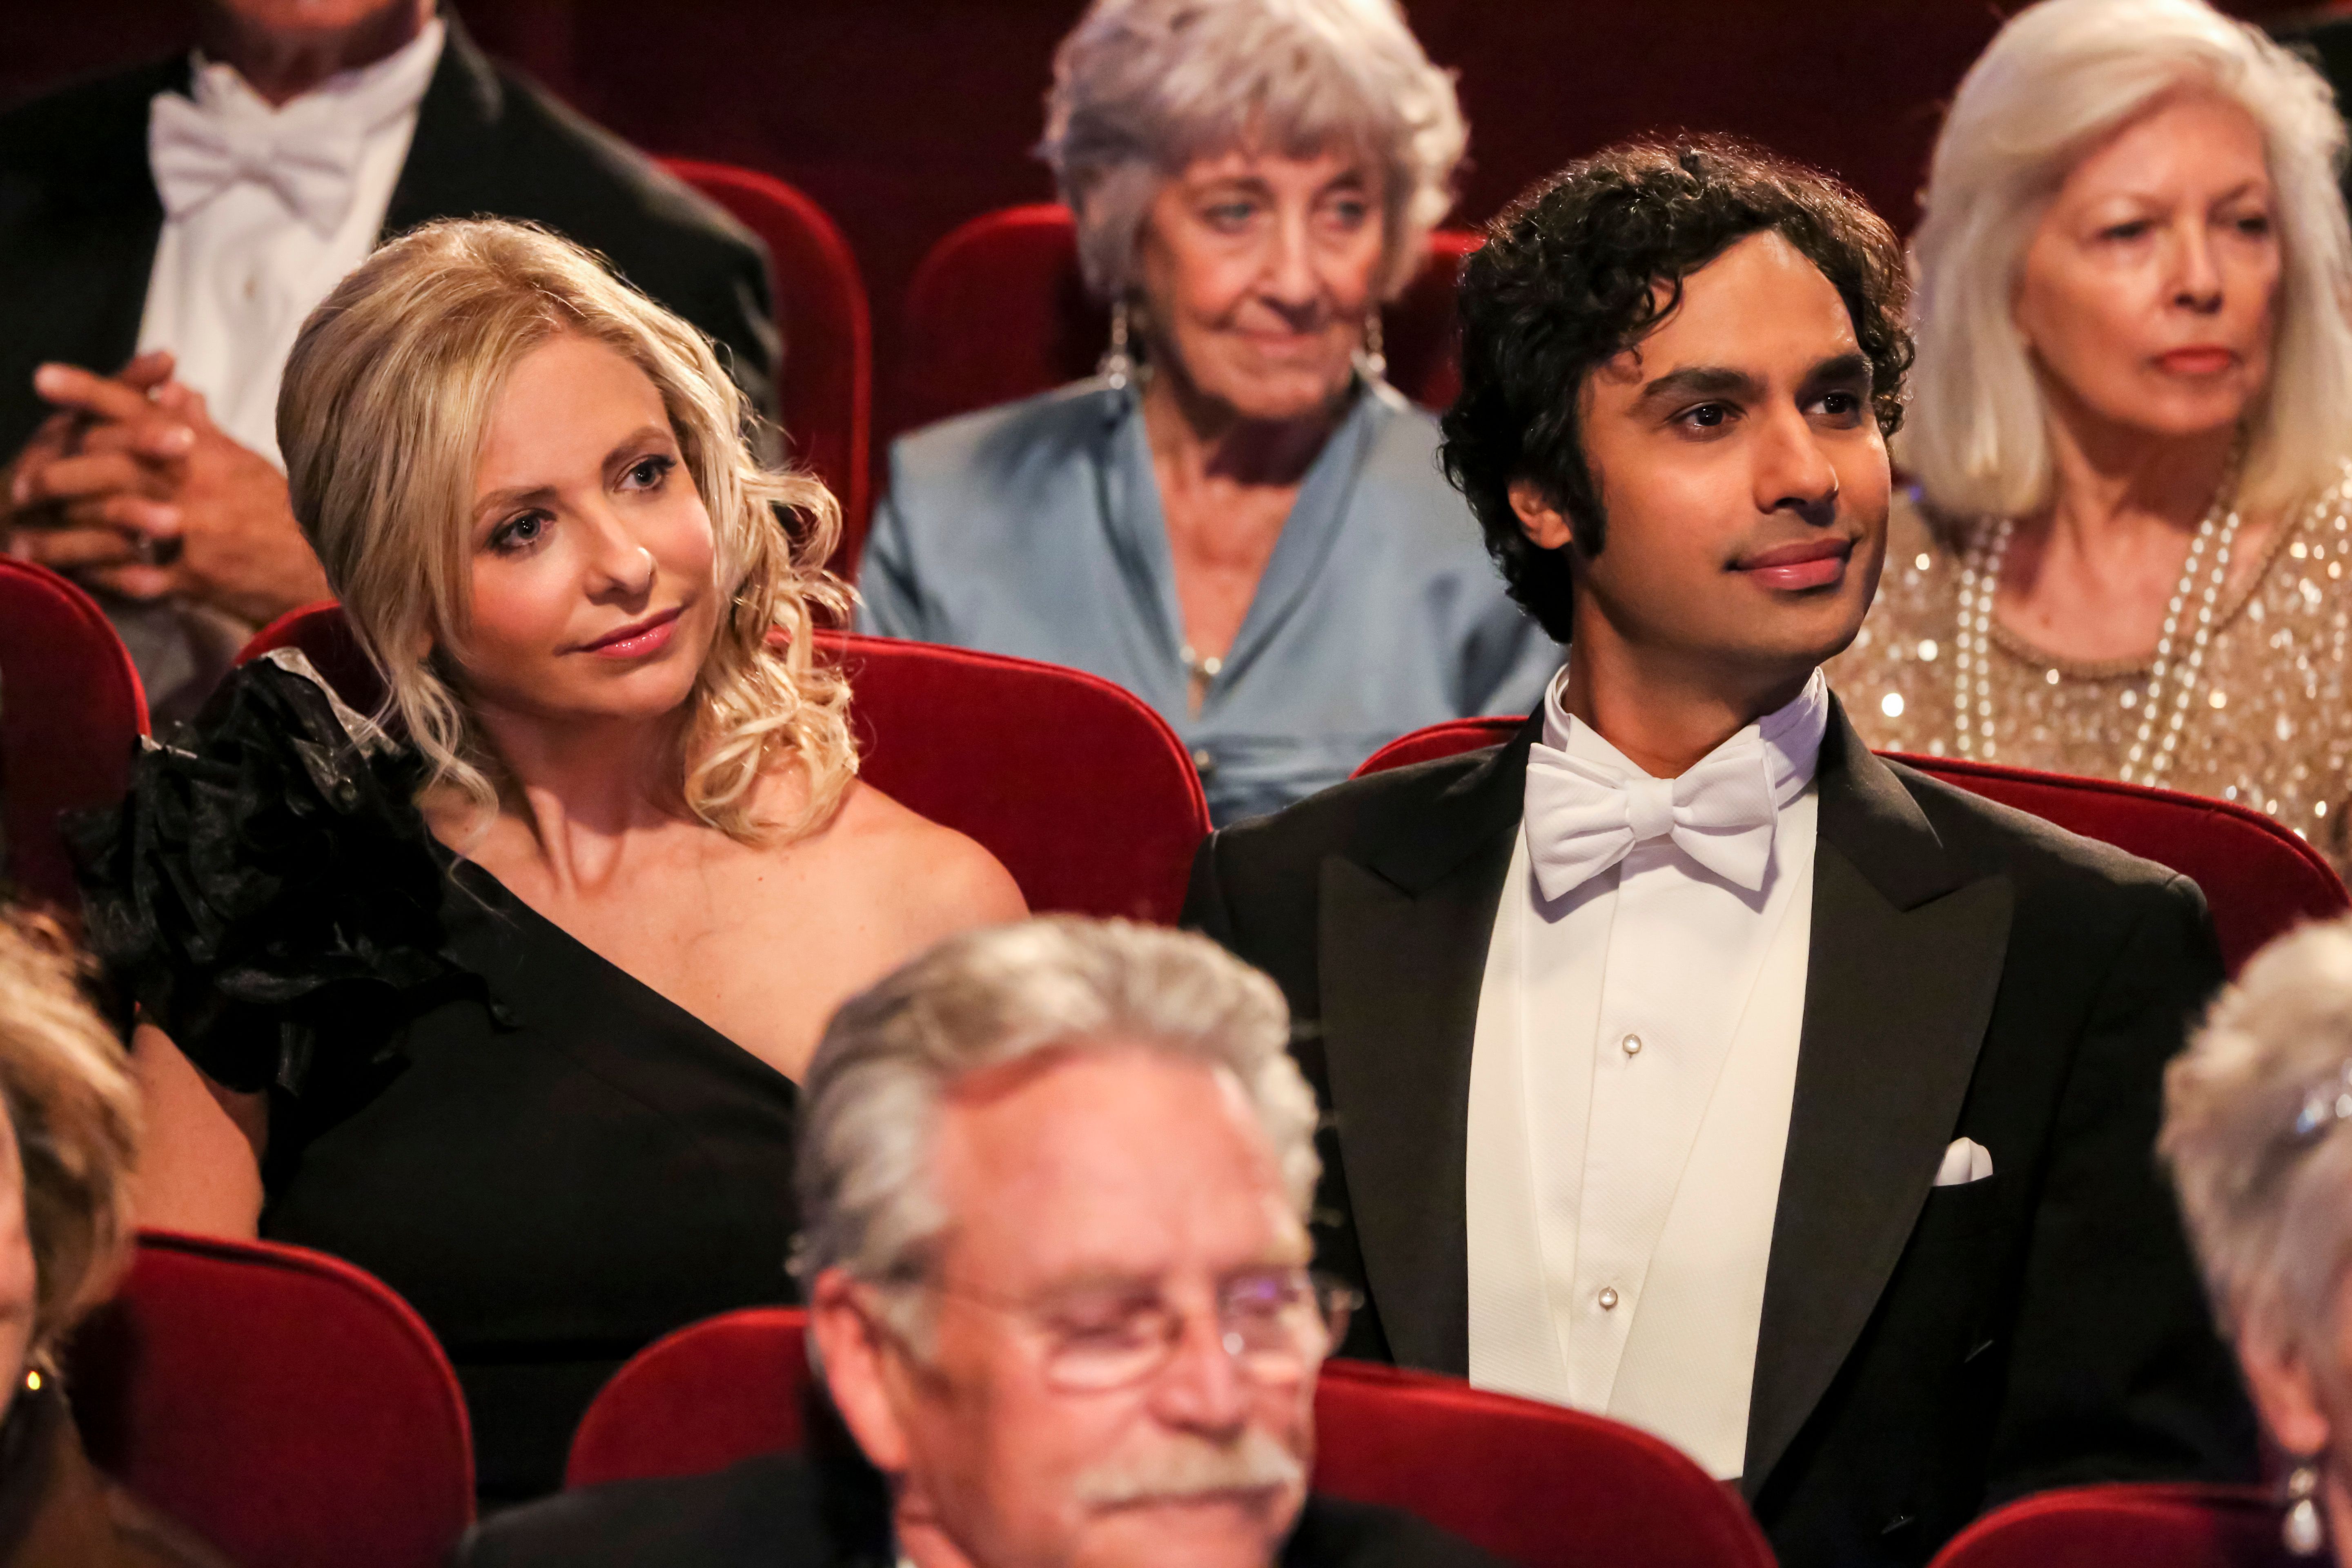 &quot;The Stockholm Syndrome&quot; - Pictured: Sarah Michelle Gellar and Rajesh Koothrappali (Kunal Nayyar). Bernadette and Wolowitz leave their kids for the first time, Penny and Leonard try to keep a secret, Sheldon and Amy stick together, and Koothrappali makes a new friend as the gang travels together into an uncharted future, on the series finale of THE BIG BANG THEORY, Thursday, May 16 (8:30 - 9:00PM, ET/PT) on the CBS Television Network. Photo: Michael Yarish/CBS ©2019 CBS Broadcasting, I